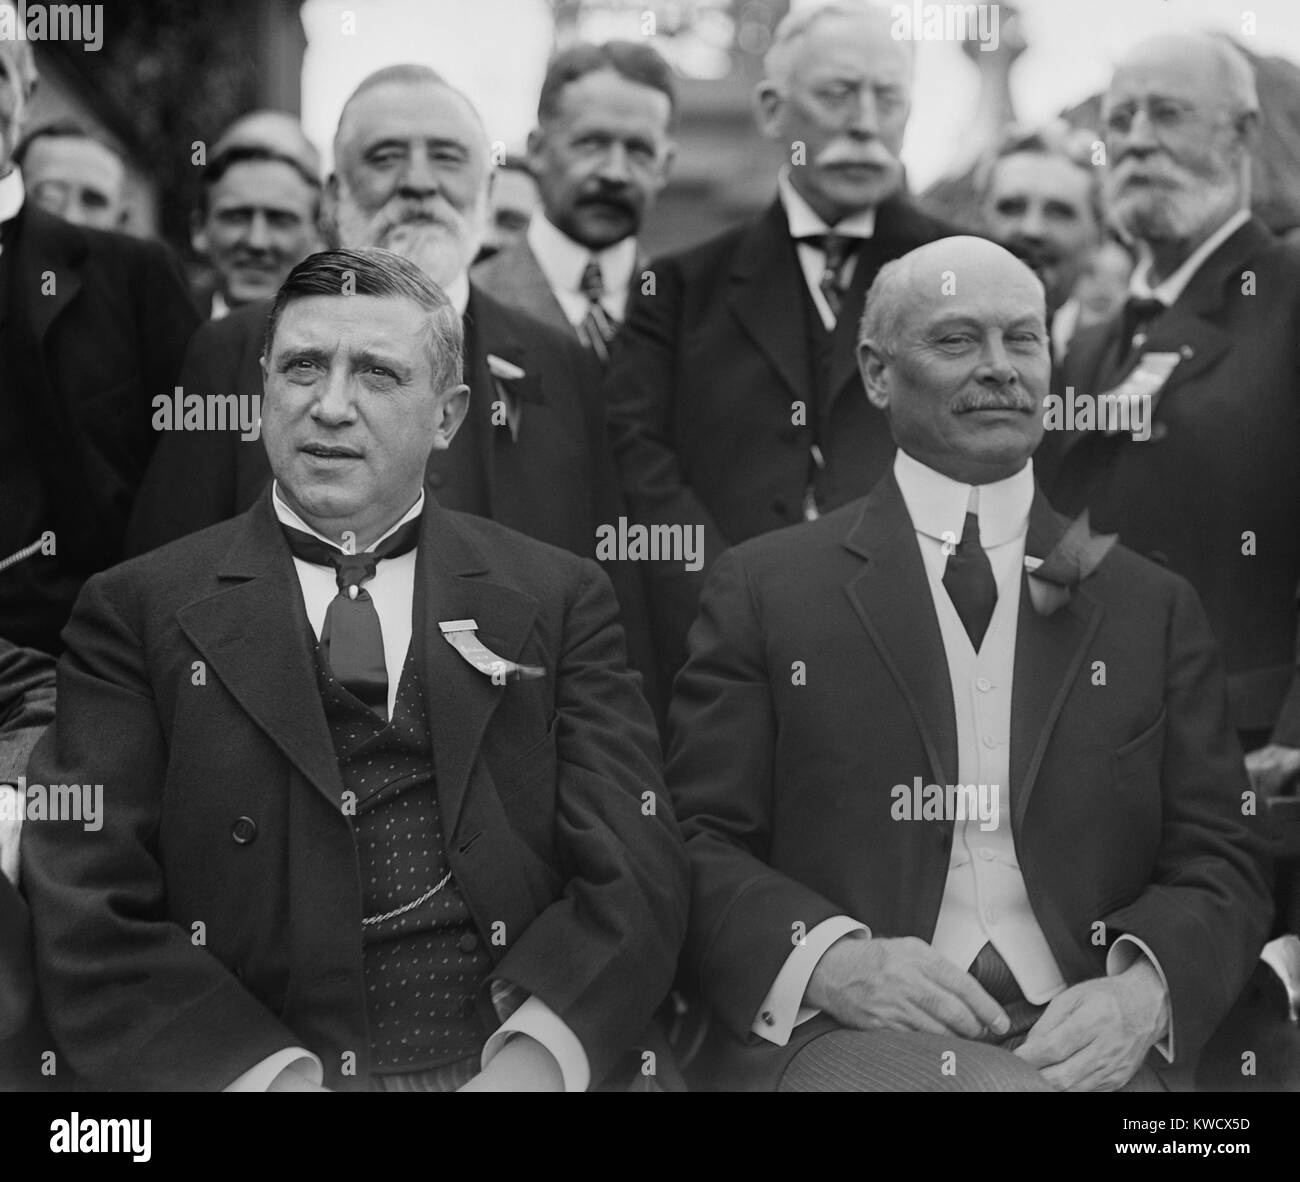 Charles M. Schwab and Elbert Gary, c. 1900-1905. In 1901, Schwab and Gary joined Andrew Carnegie and J.P. Morgan in forming the giant United States Steel Corporation. Schwab became the first president of the company, left in 1903, after disagreements with Morgan and Gary (BSLOC 2017 2 183) Stock Photo